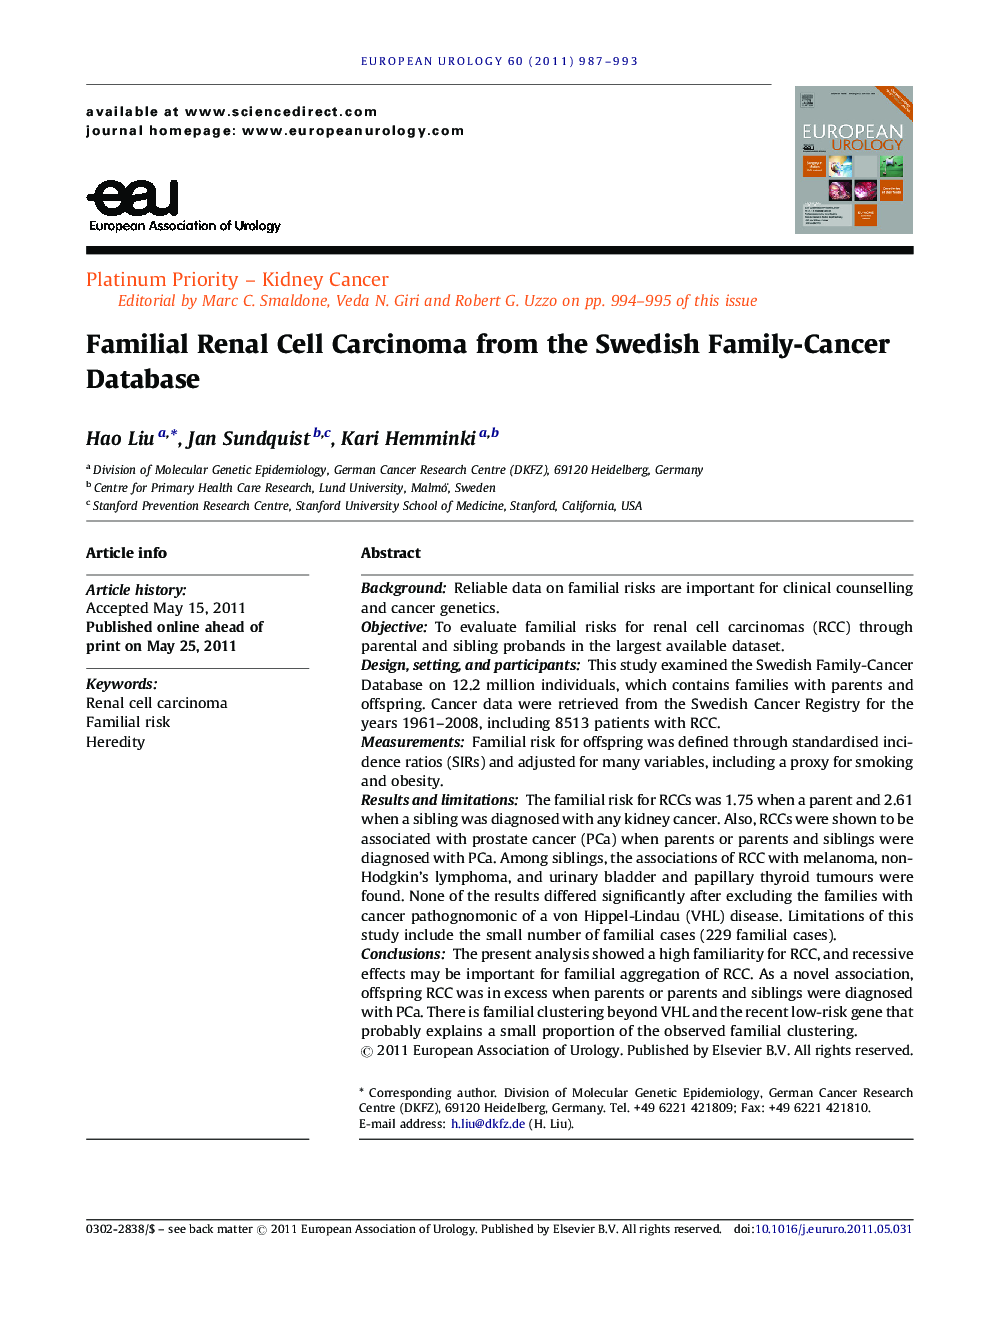 Familial Renal Cell Carcinoma from the Swedish Family-Cancer Database